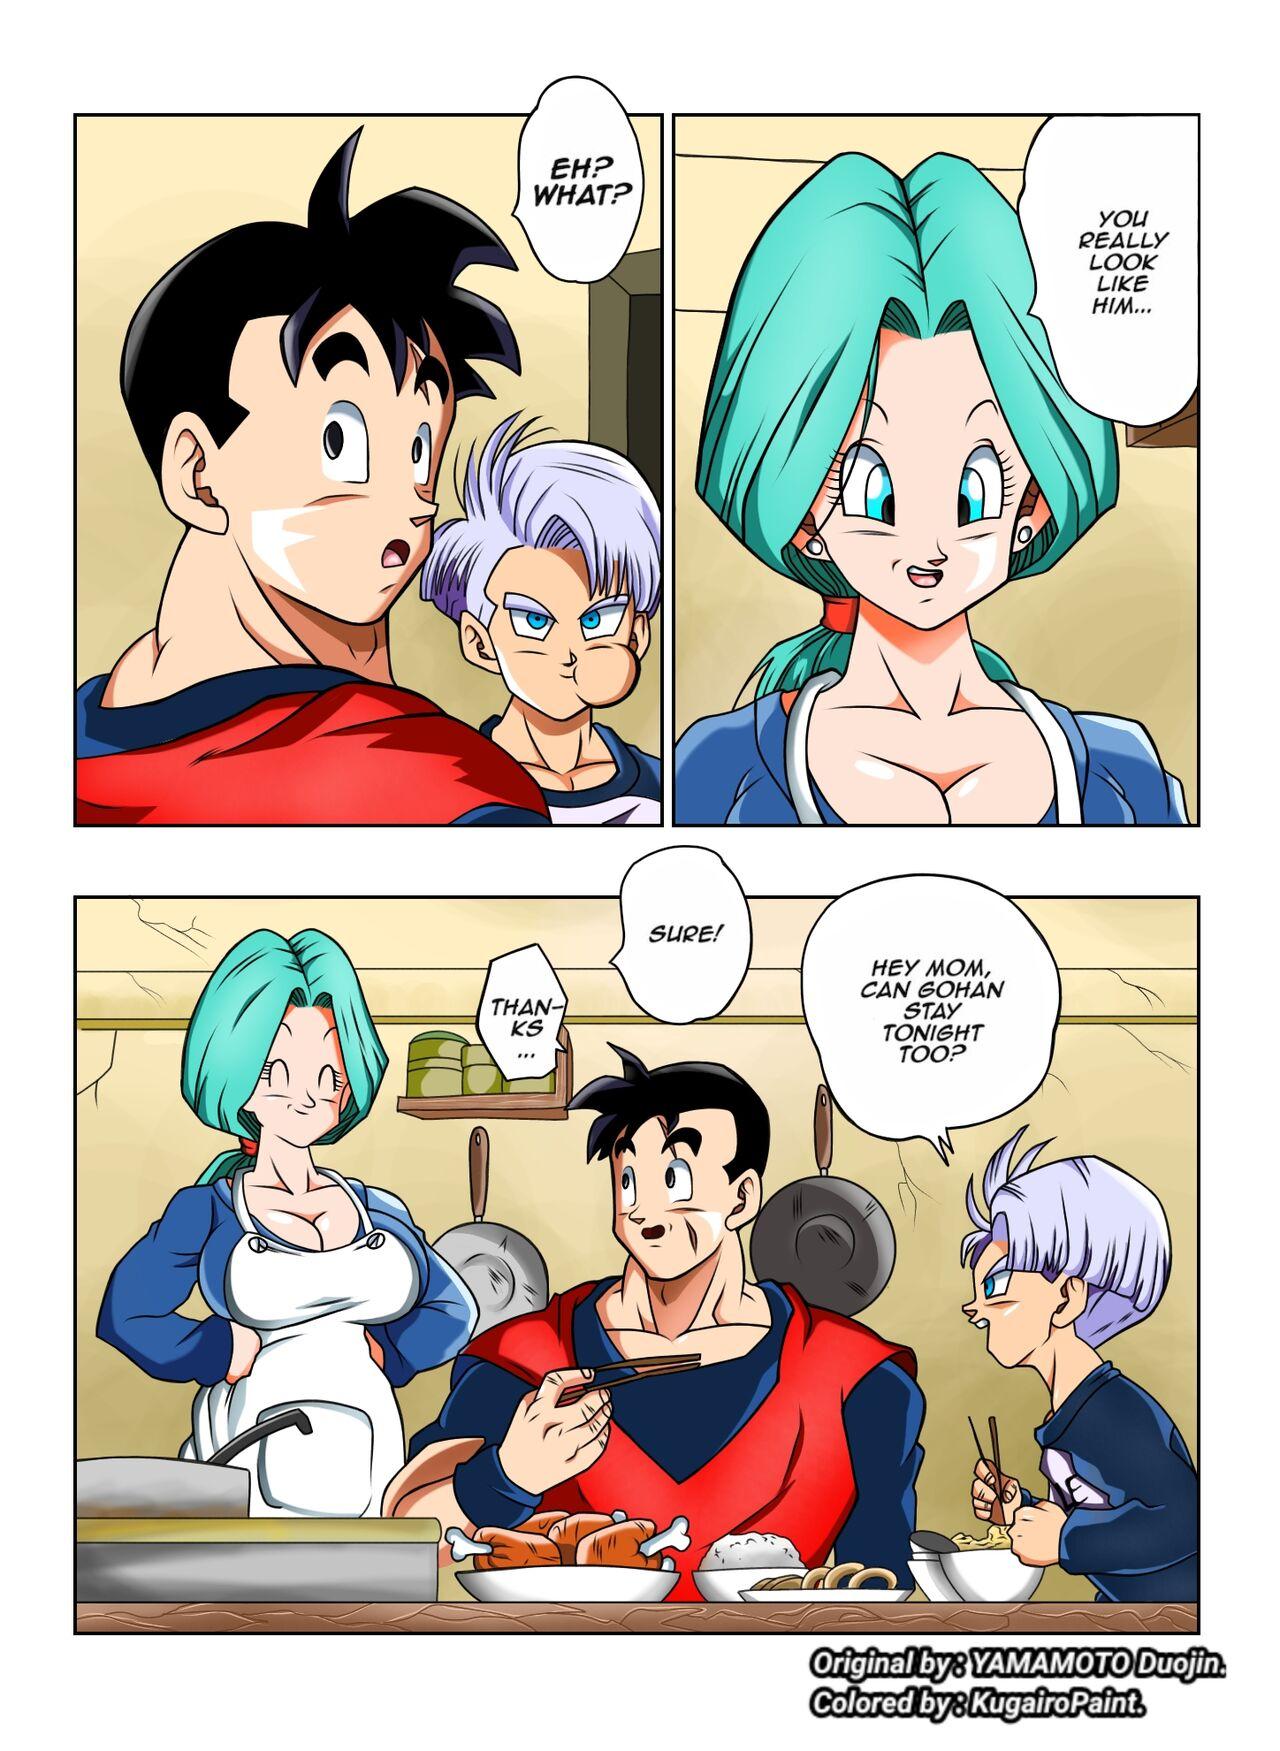 Boquete Lots of Sex in this Future!! - Dragon ball z Watersports - Picture 3